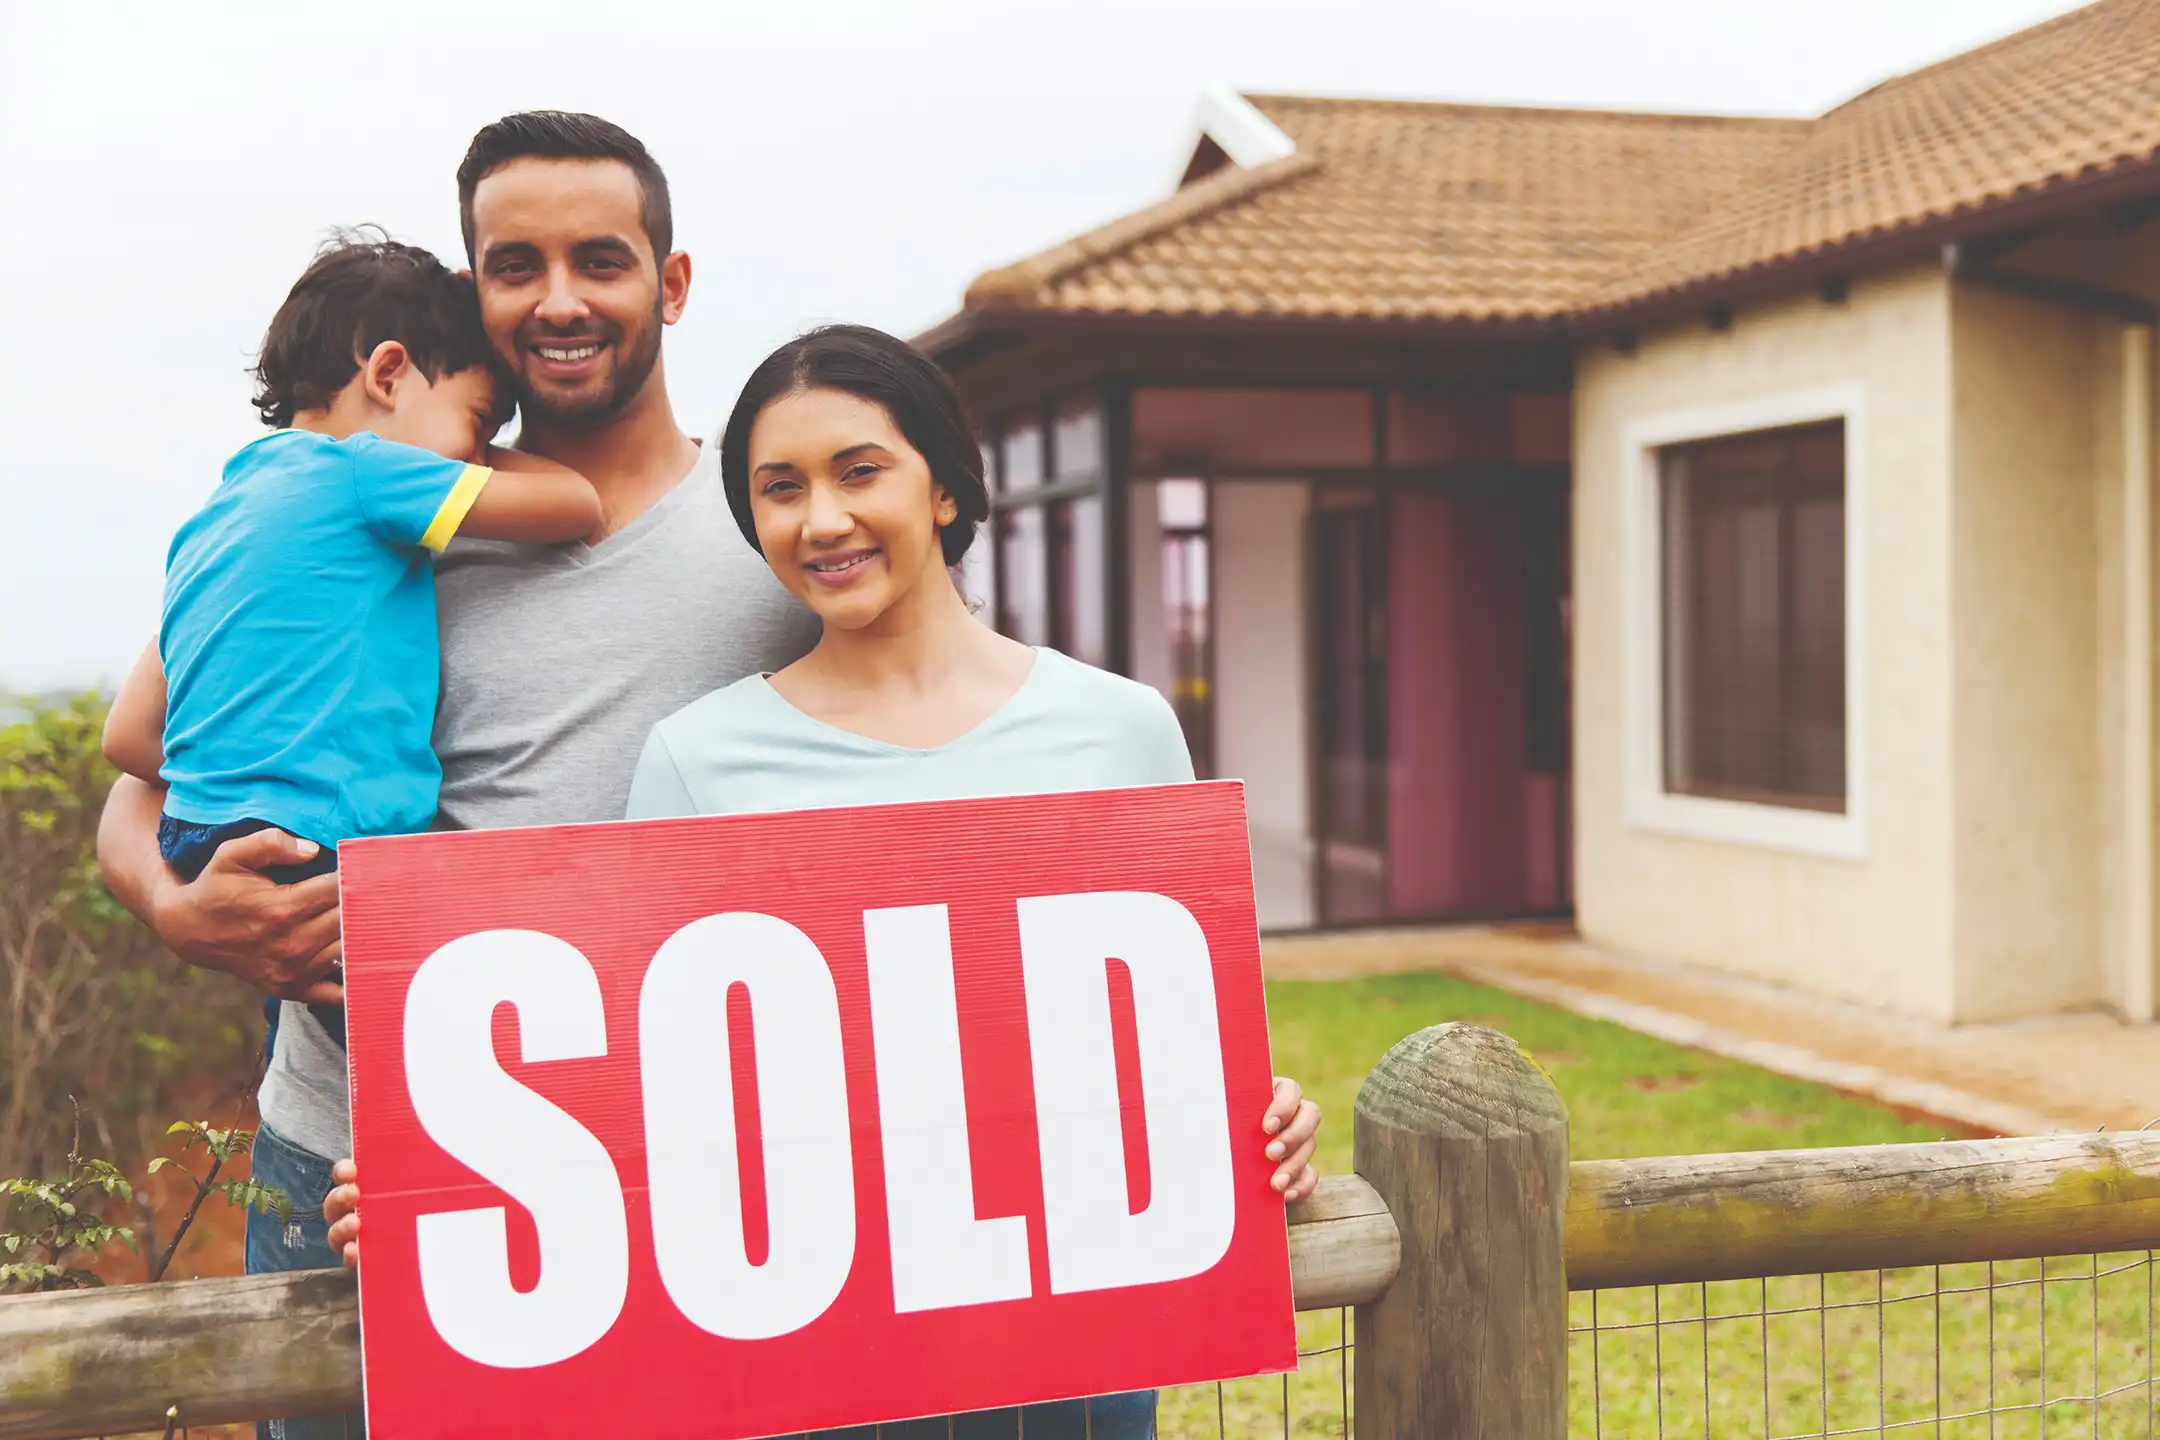 A family of three holding a "sold" sign outside their newly purchased home.